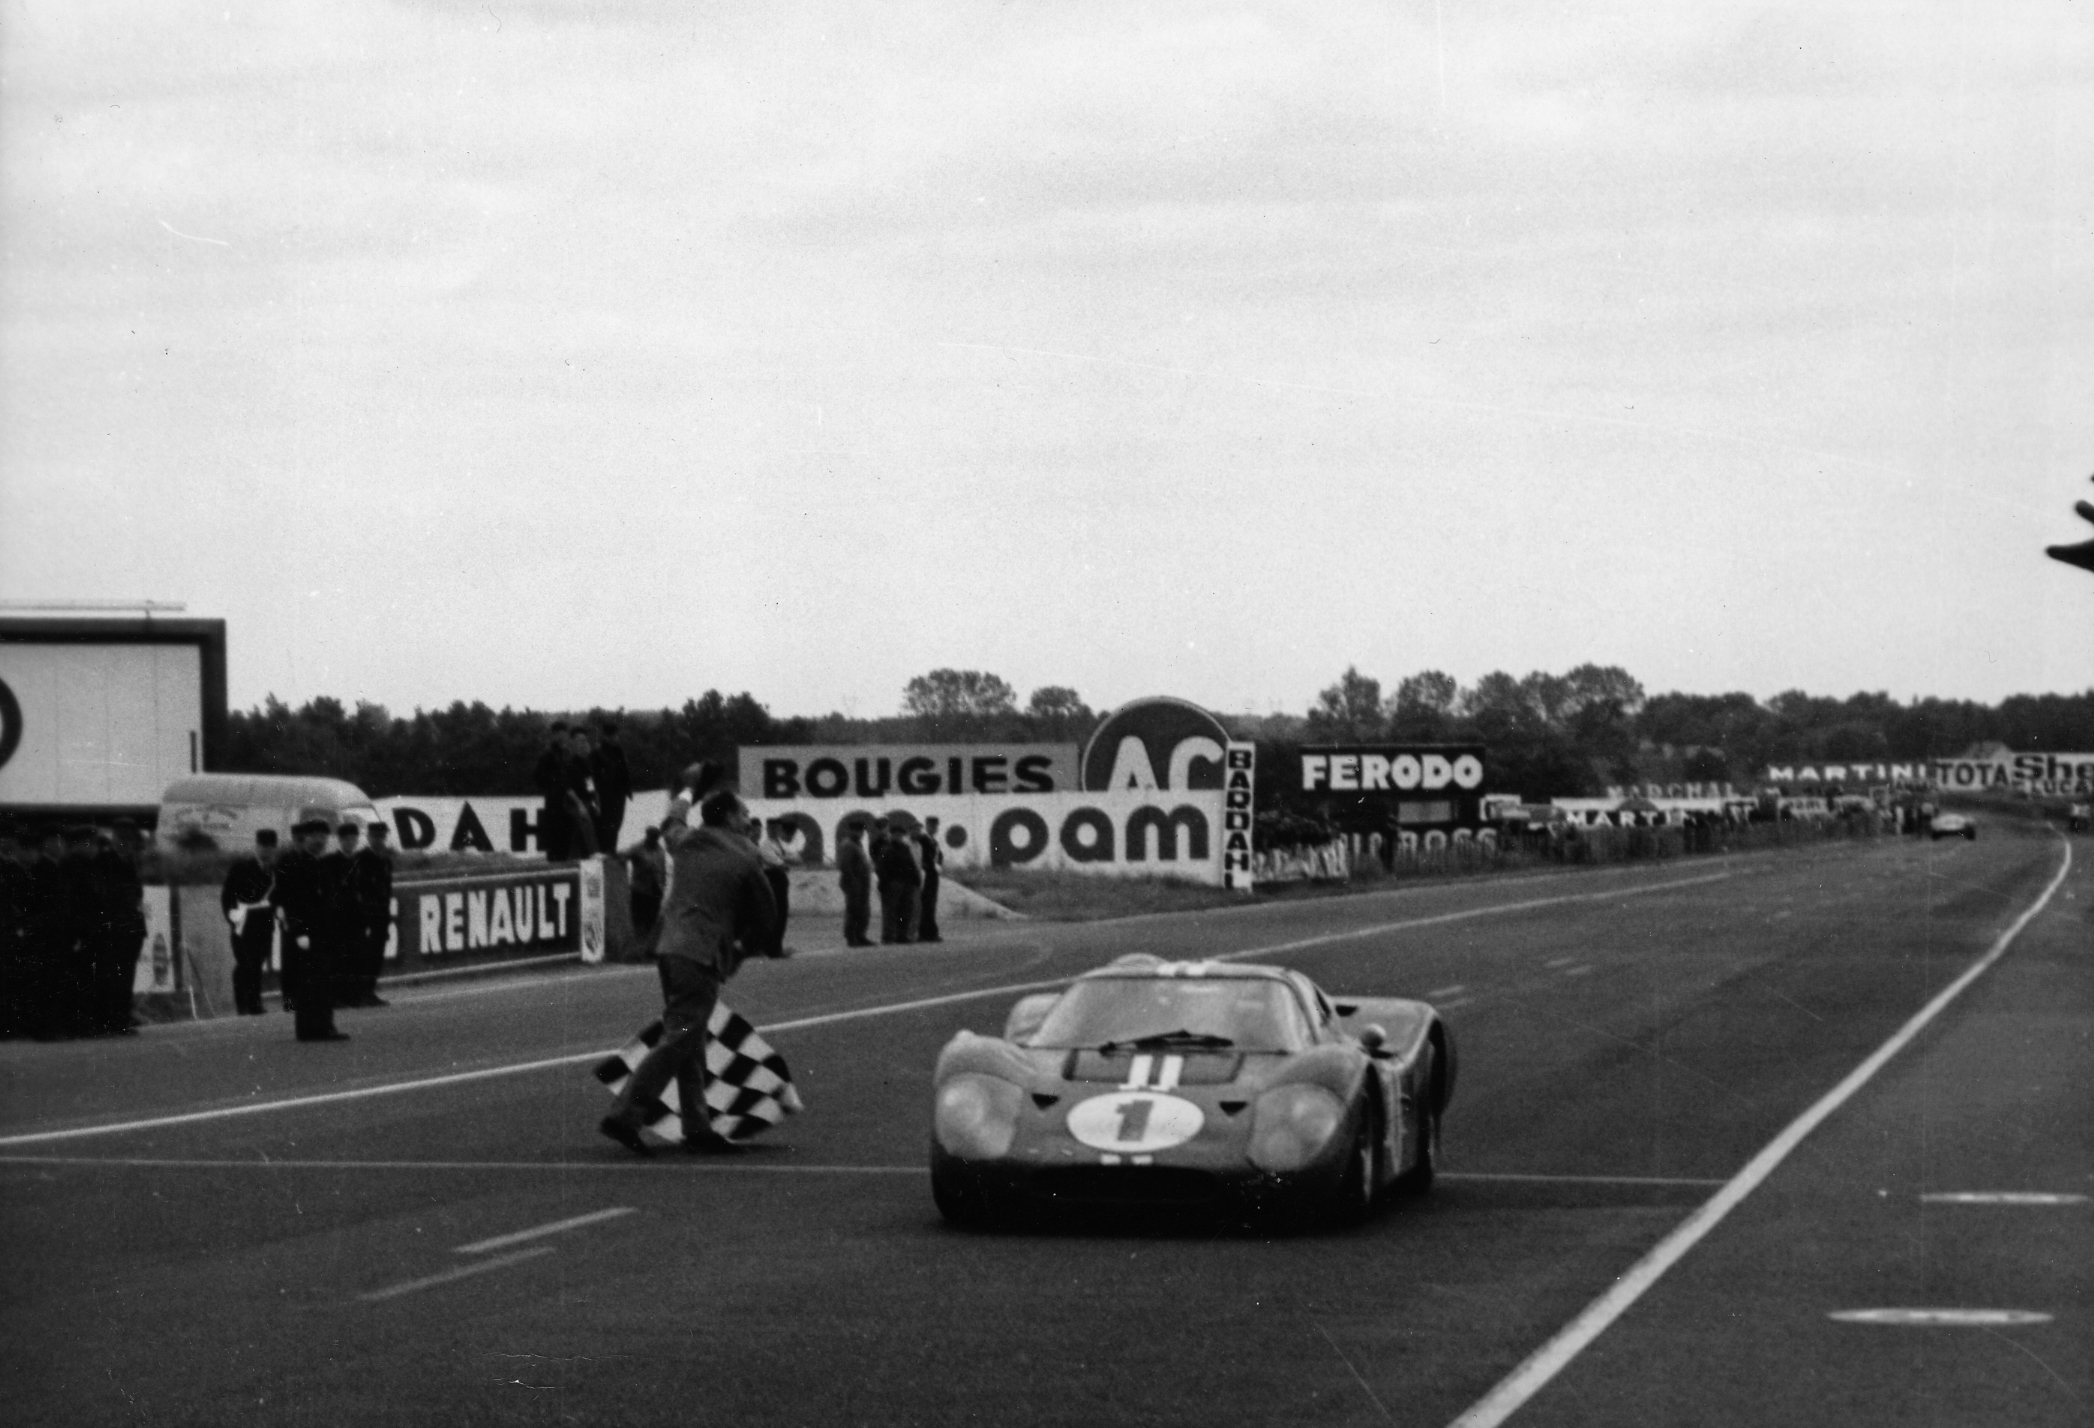 The 1967 Ford GT40 Mk.IV, improved version of the Mk.II winner the previous year, was a venerable weapon. Its finessed aerodynamics helped the car reach 340 kph in the Mulsanne Straight.